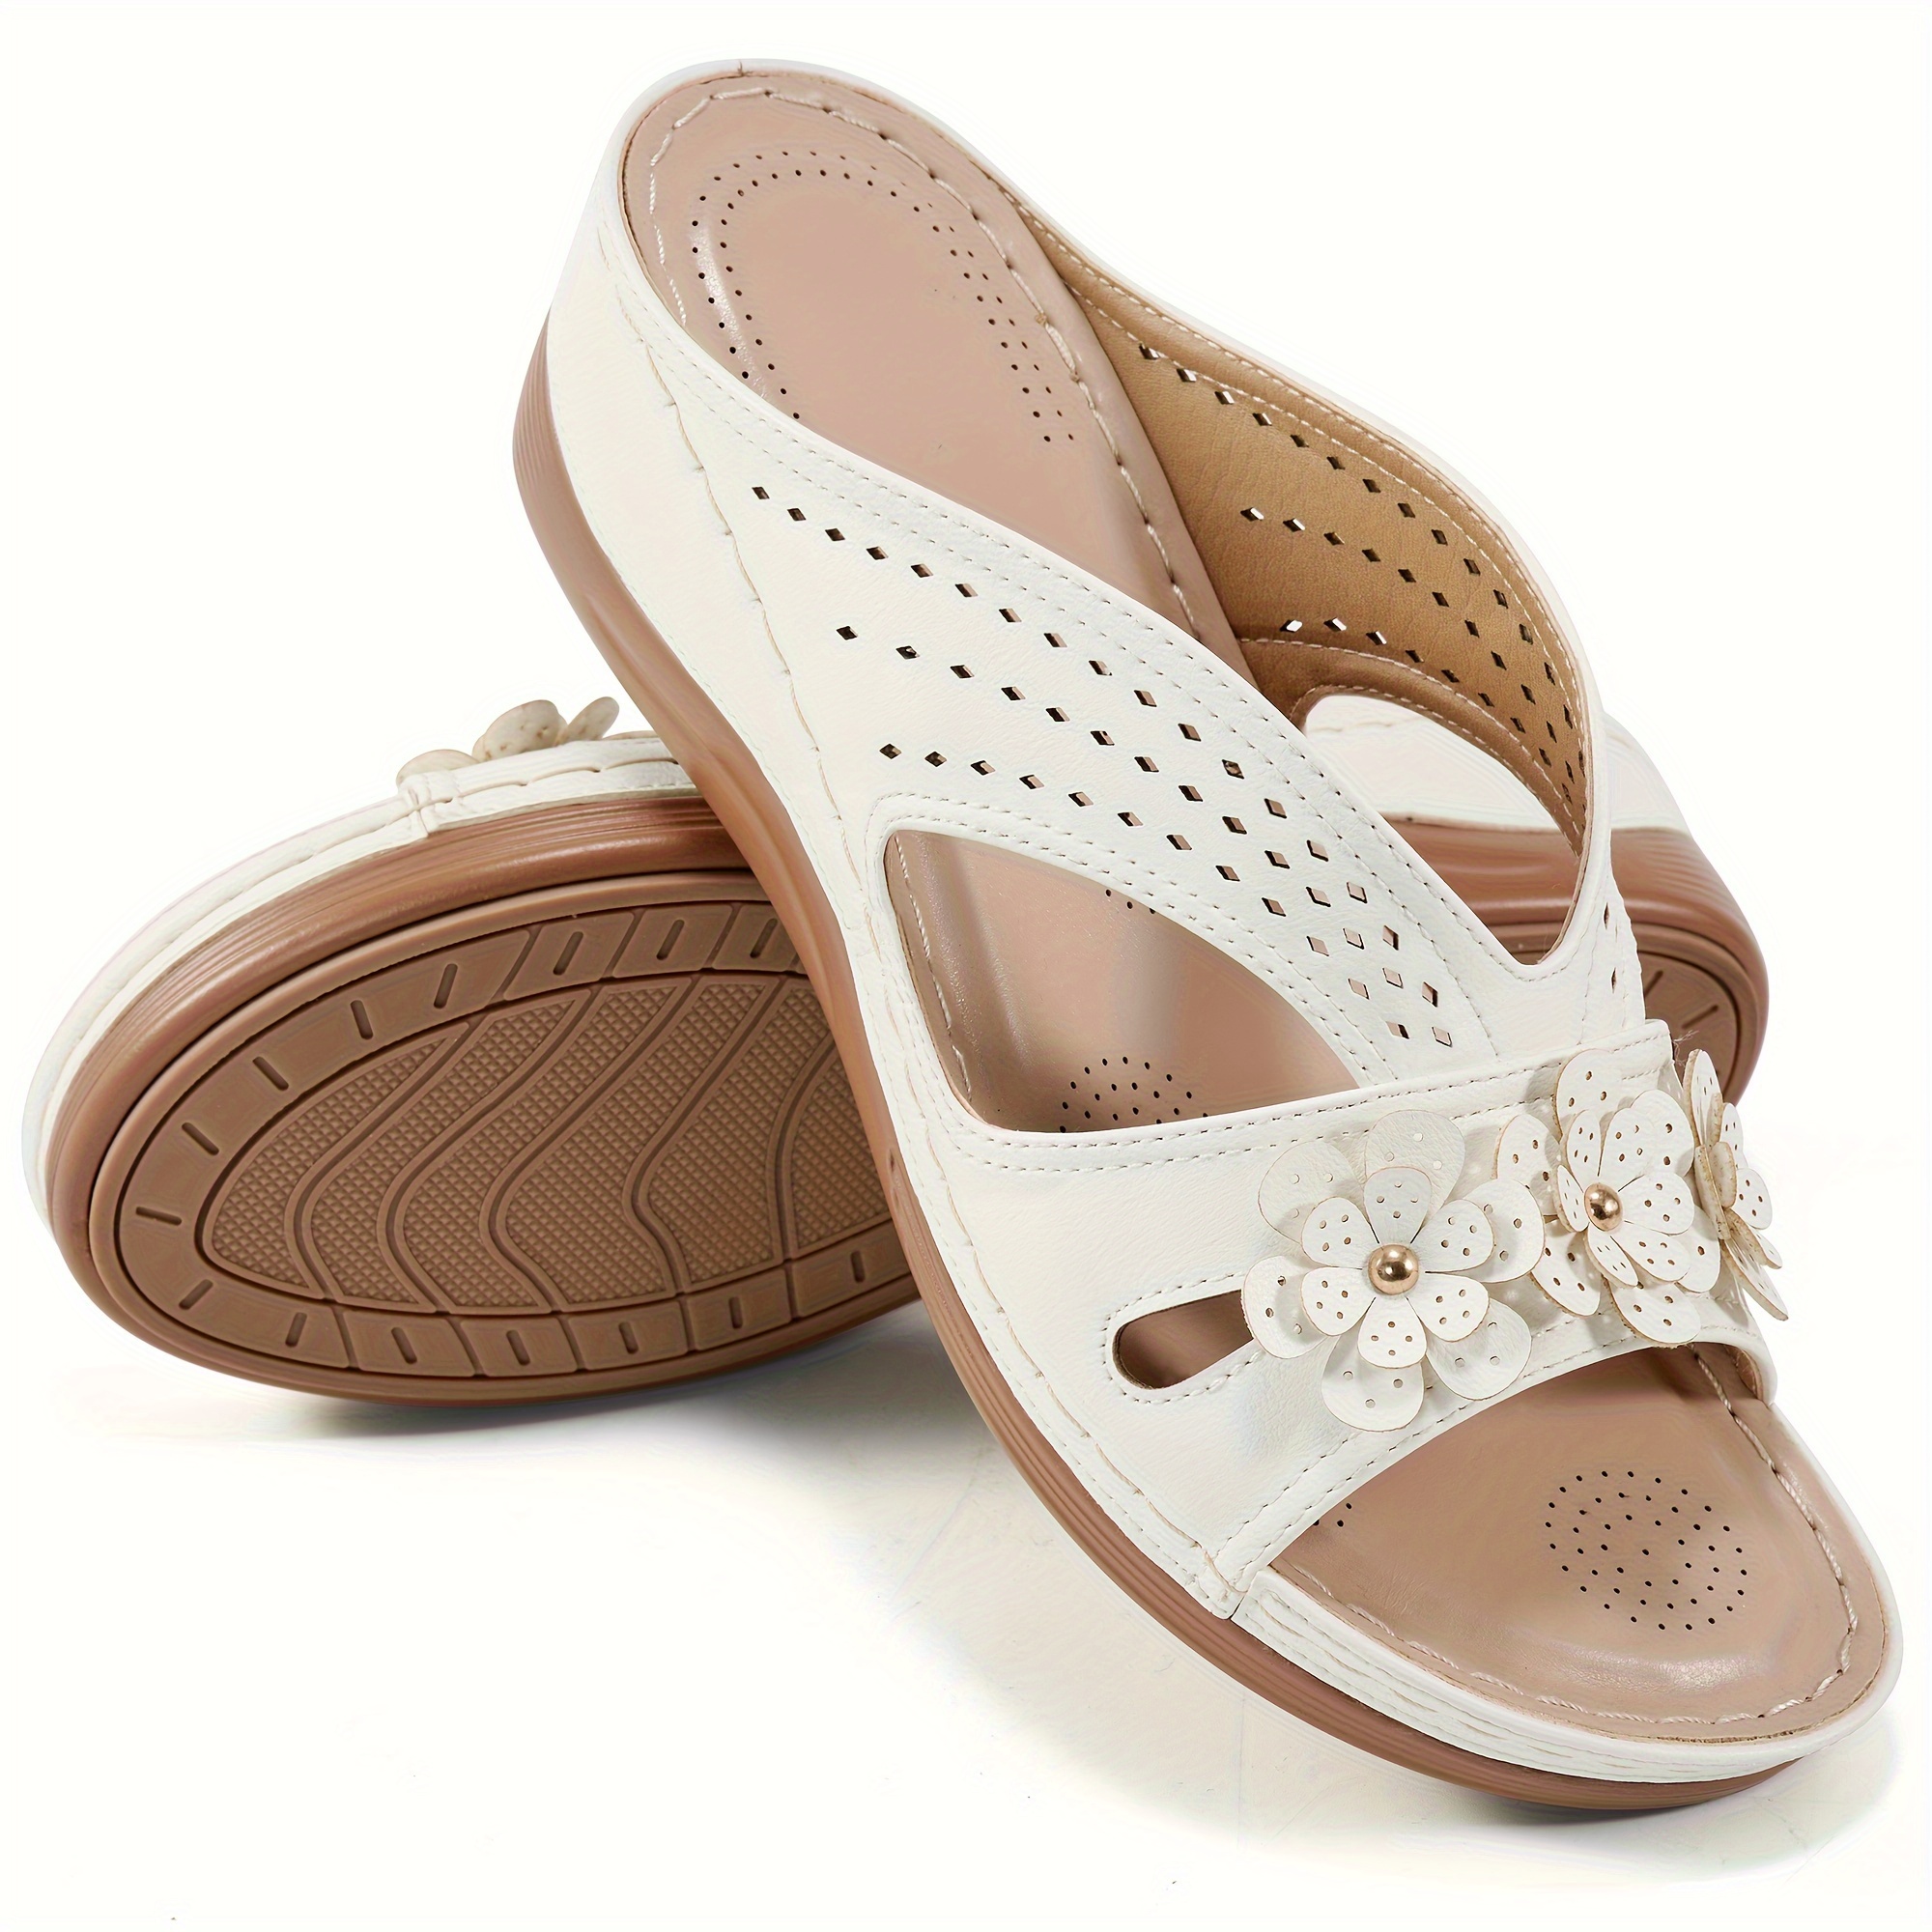 

Women's Fashion Slide Sandals With Floral Decoration, Comfortable Soft Sole Non-slip Outsole, Breathable Summer Footwear